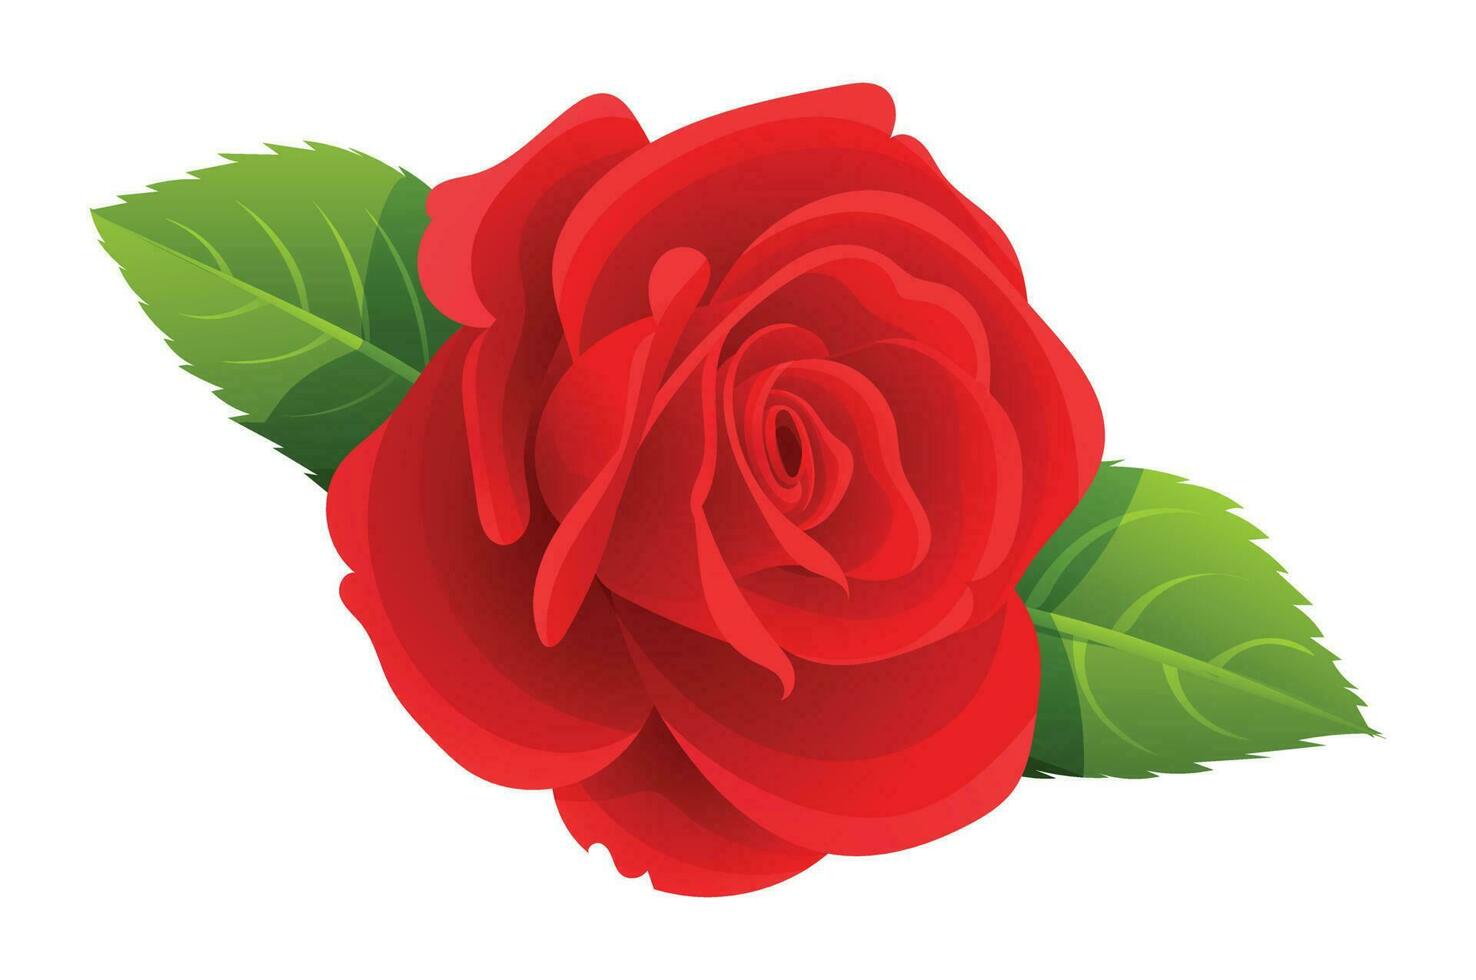 Beautiful red rose vector illustration isolated on white background